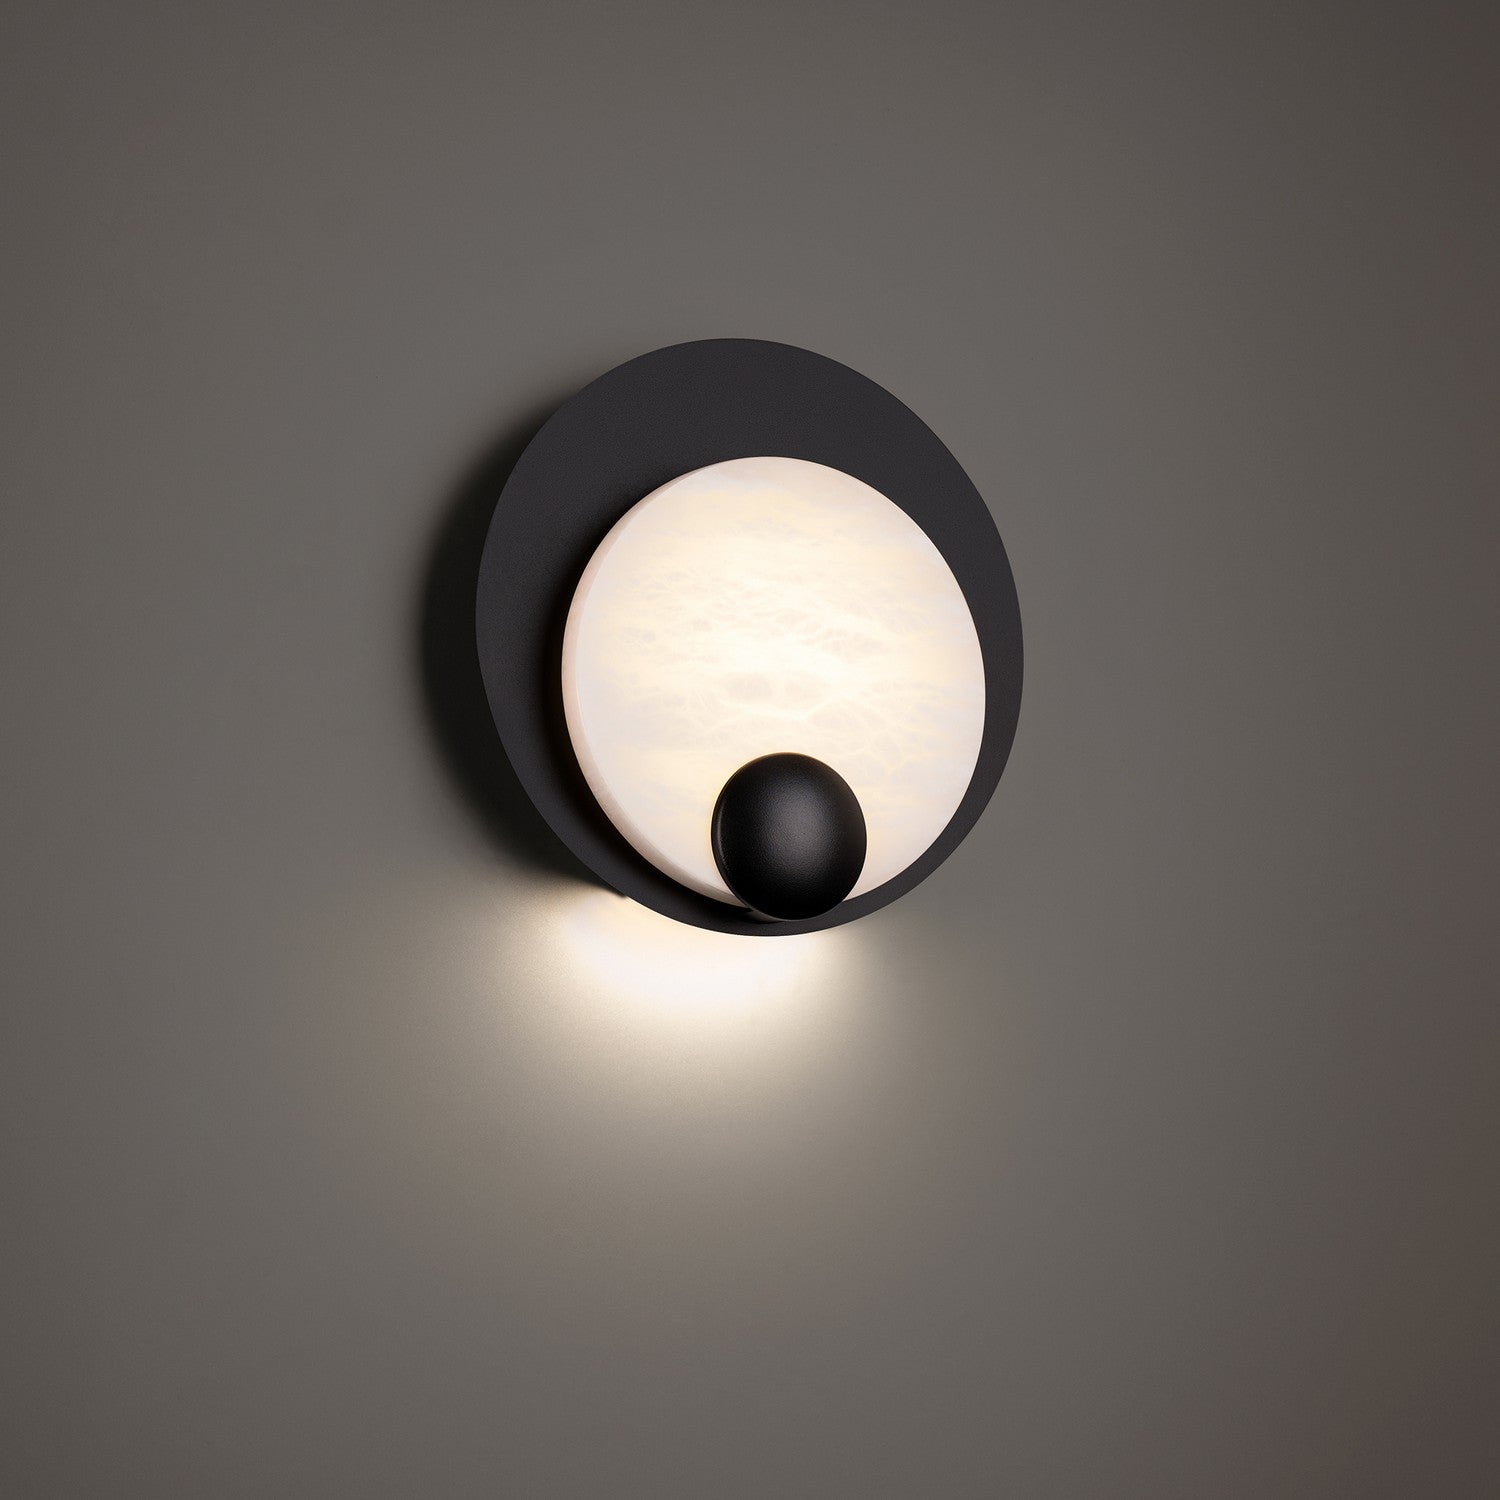 Modern Forms Canada - WS-82310-BK - LED Wall Sconce - Rowlings - Black